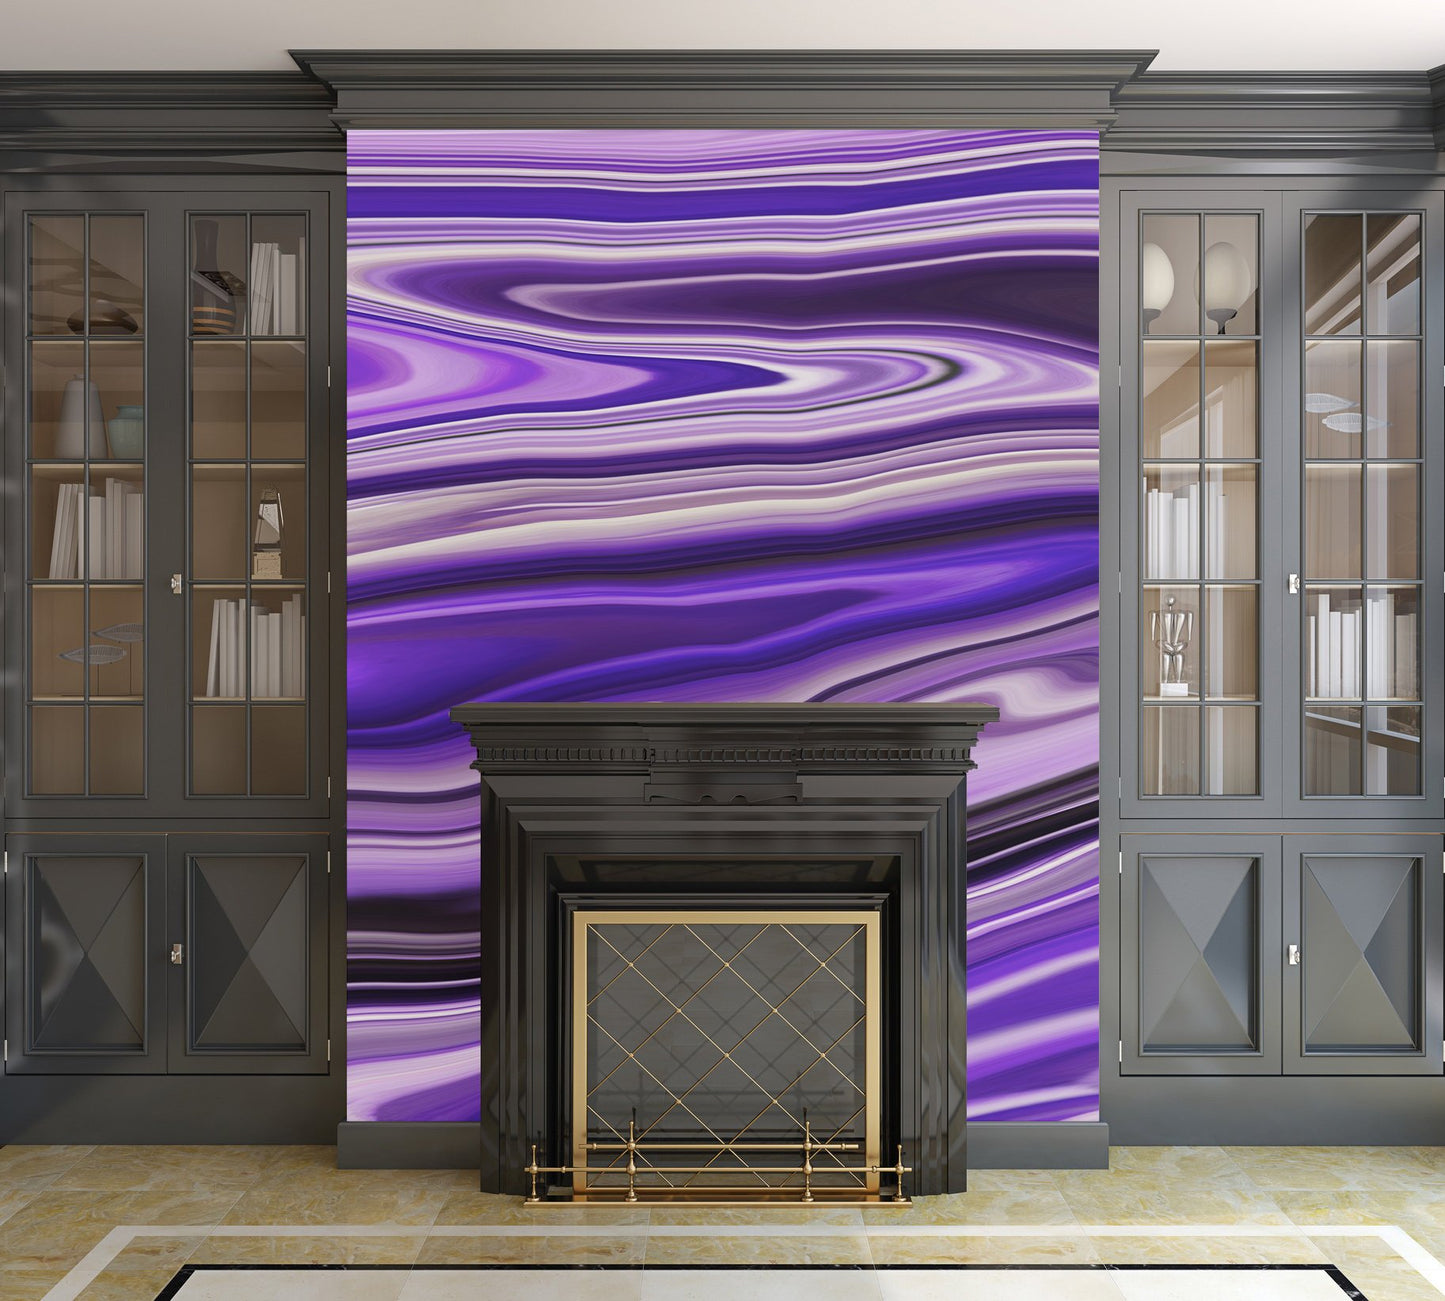 Purple Waves Abstract Art Digital Fluid Artwork - Peel and Stick Removable Wallpaper Full Size Wall Mural  - PIPAFINEART